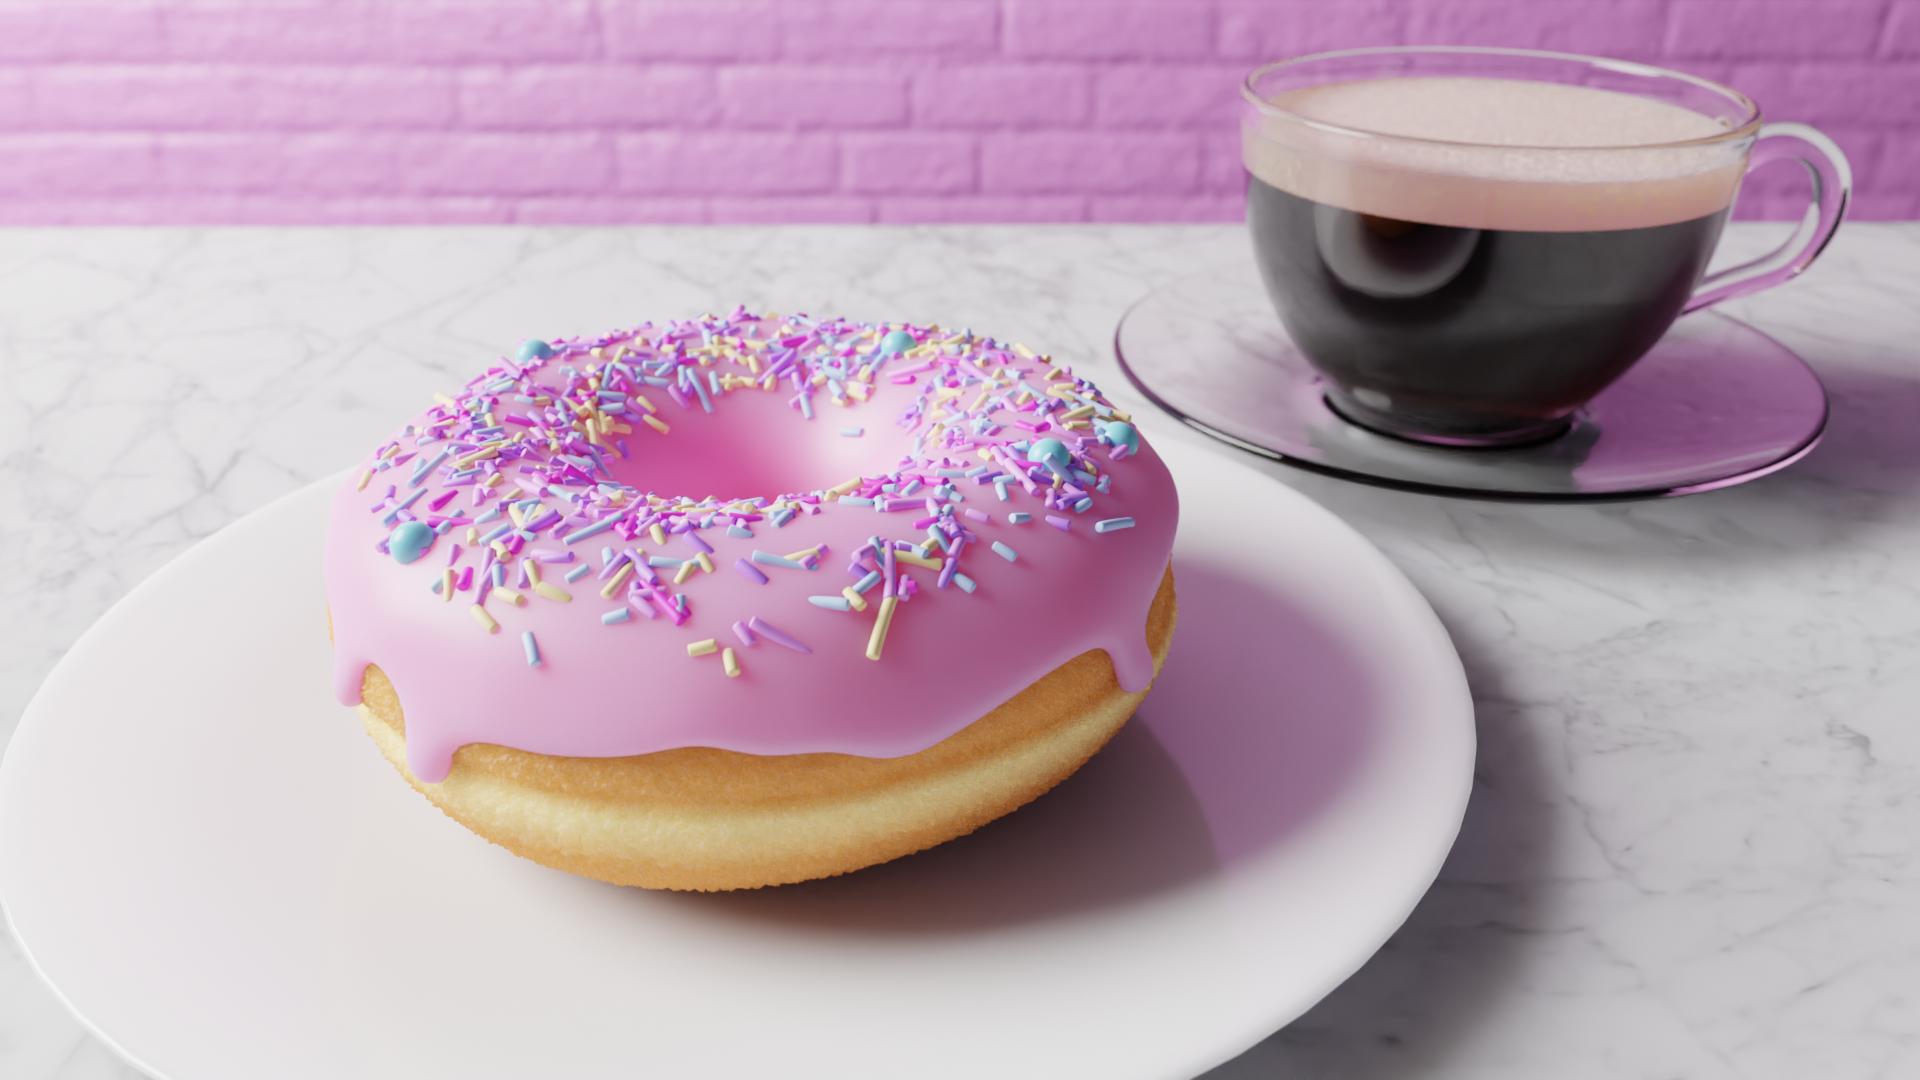 Andrew Price on Twitter: "The new Blender Beginner Donut tutorial series  has started! https://t.co/7wN5wiEeJT New episodes launch every other day  #b3d https://t.co/vI1BqNNw5v" / Twitter